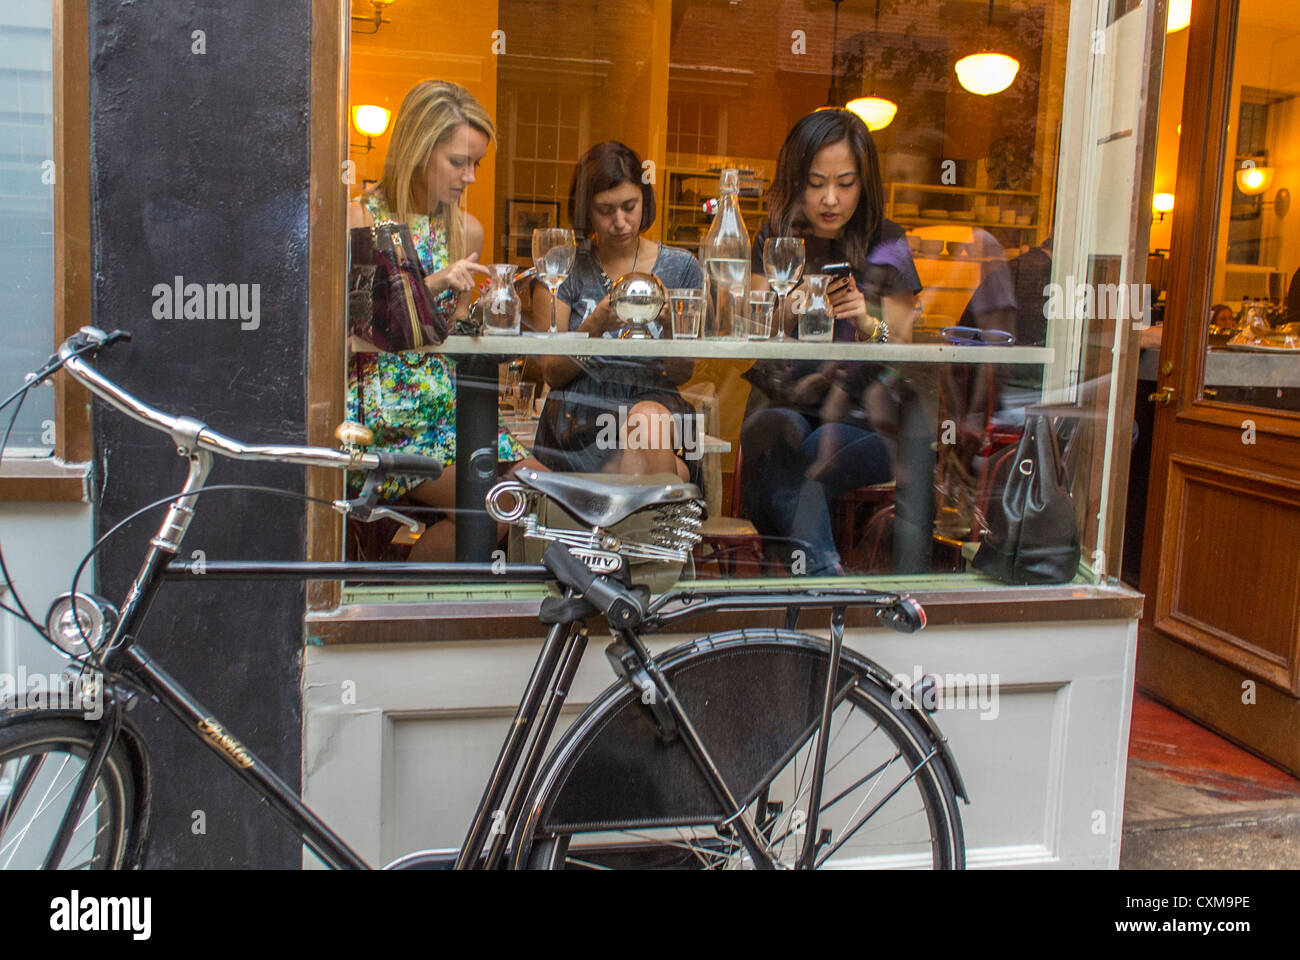 New York City, NY, USA, Small Group People, WOmen Sharing Coffee in Window, Greenwich Village Coffee Shop, Cafe, Manhattan West Village Stock Photo